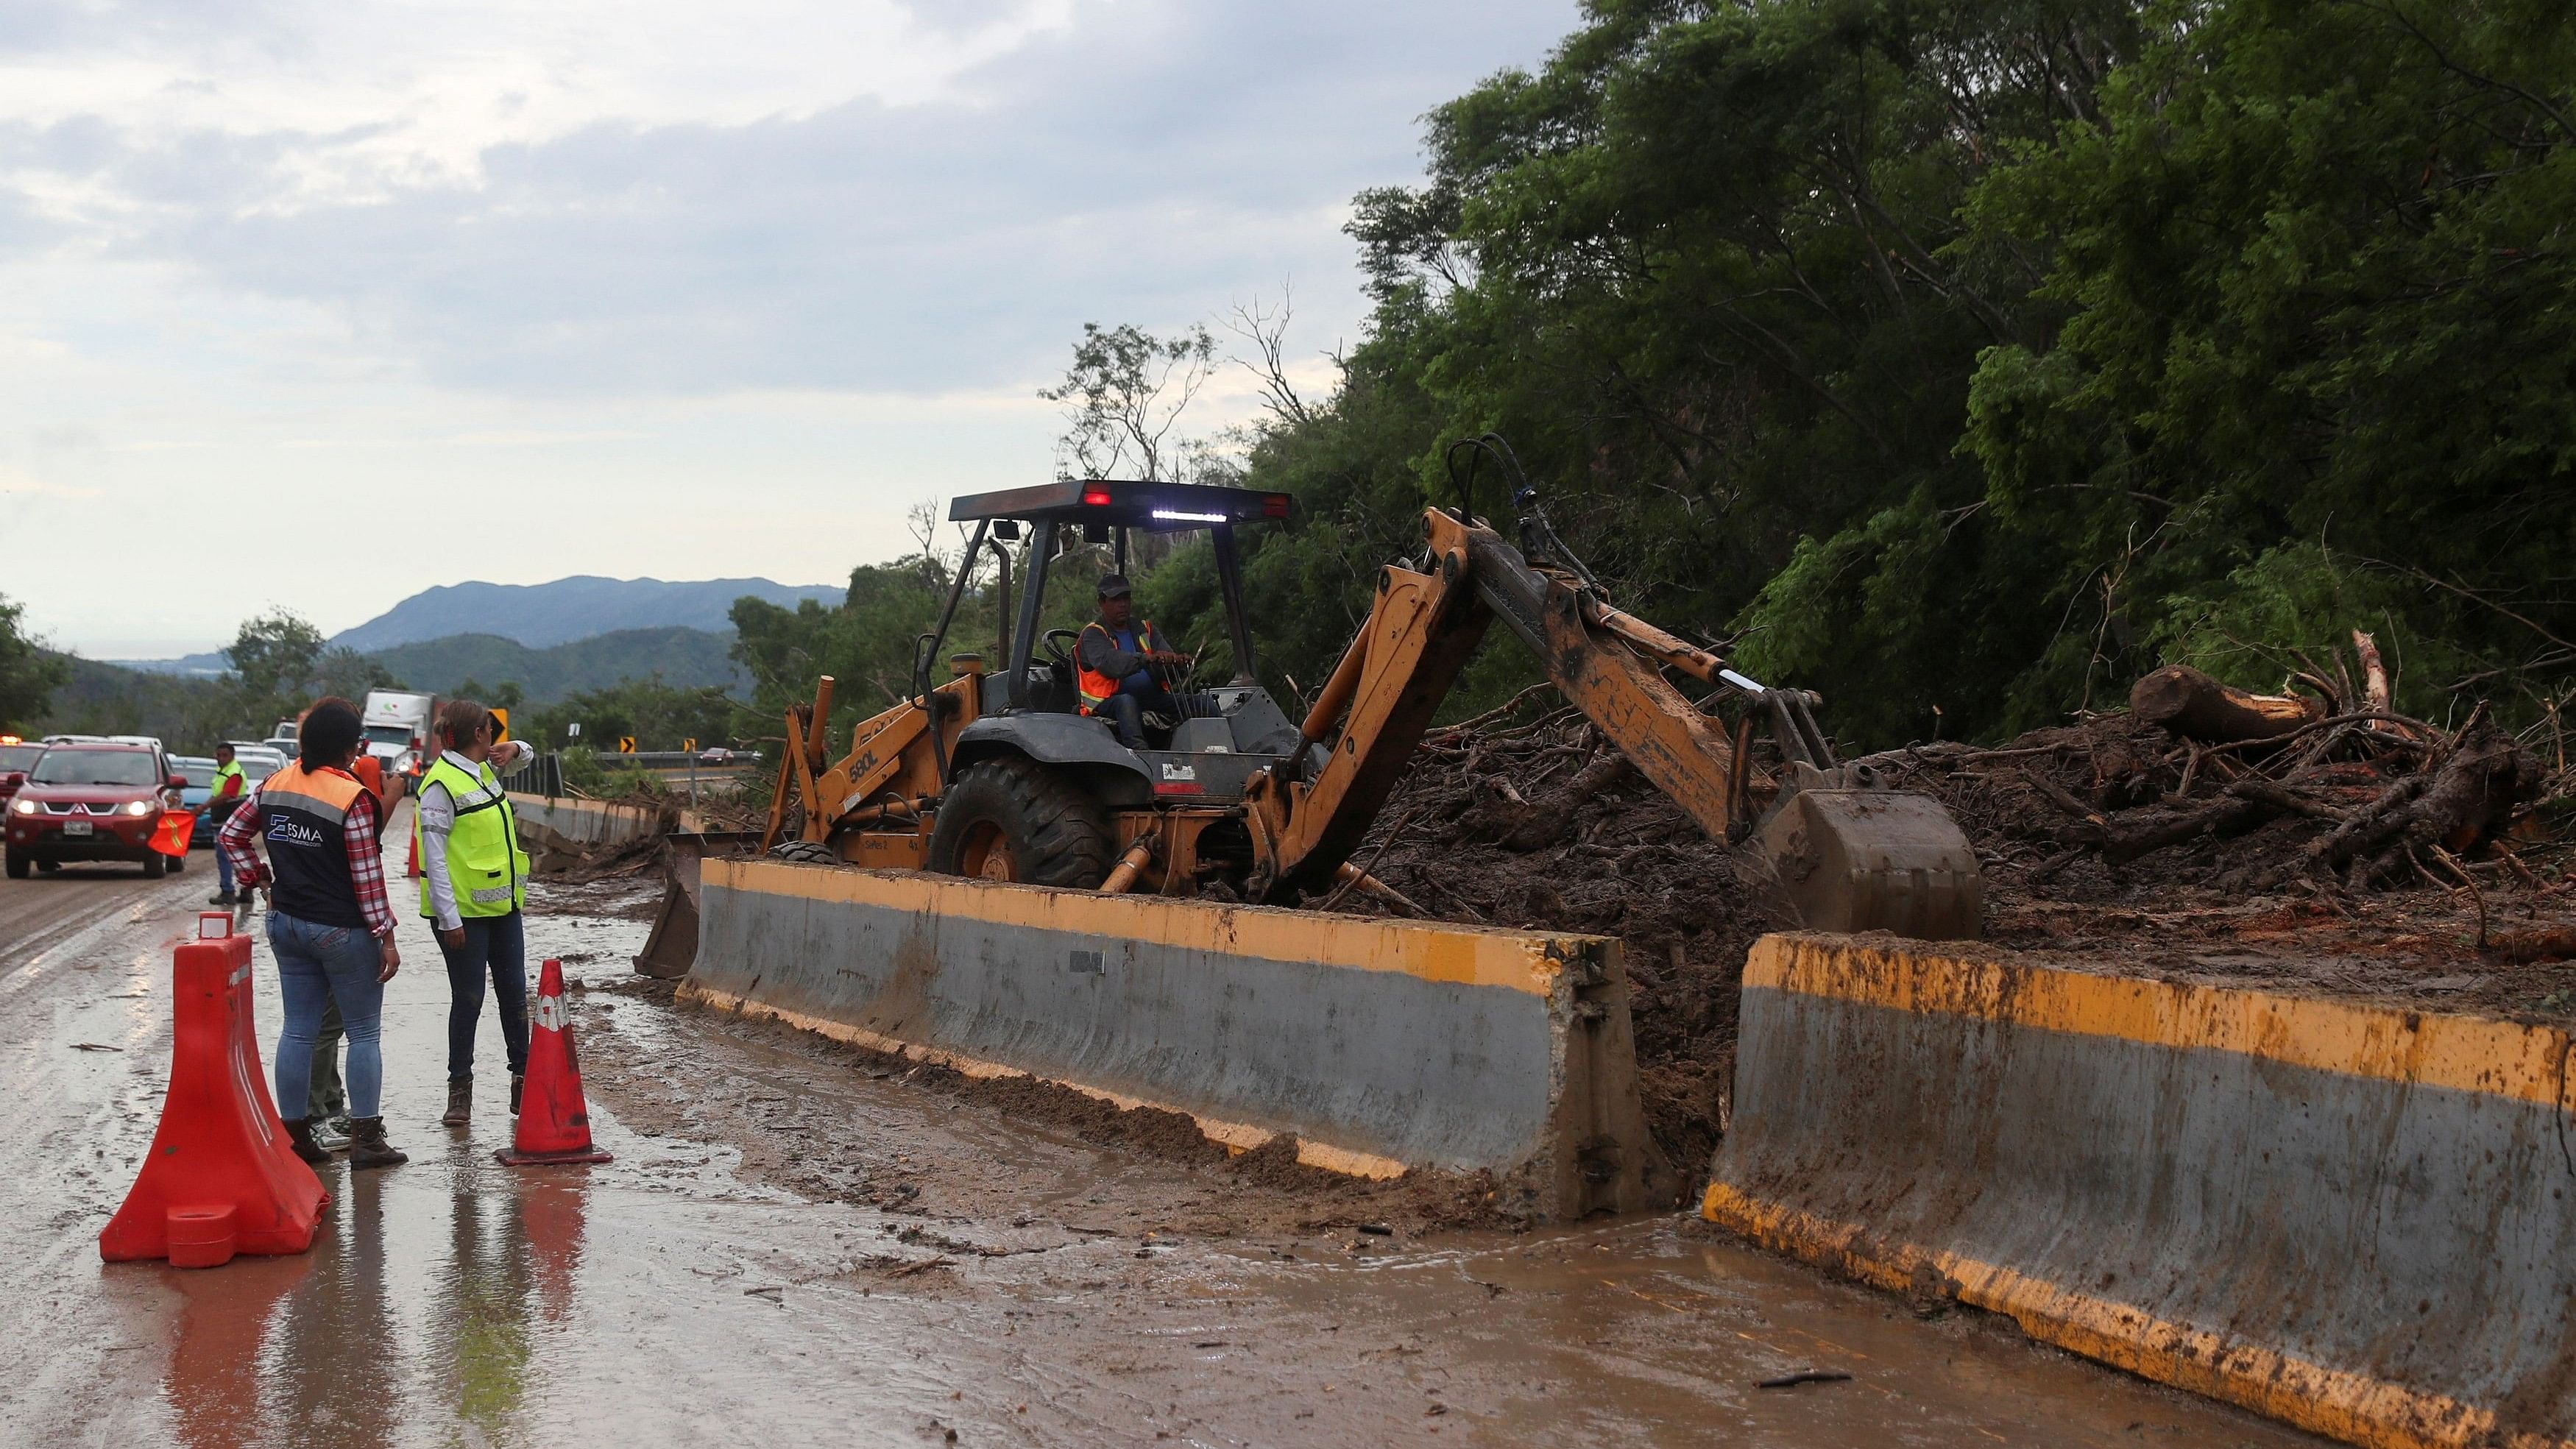 <div class="paragraphs"><p>A worker operating heavy machinery clears debris and mud left by Hurricane Otis, on a road leading to Acapulco, in the Mexican state of Guerrero.</p></div>